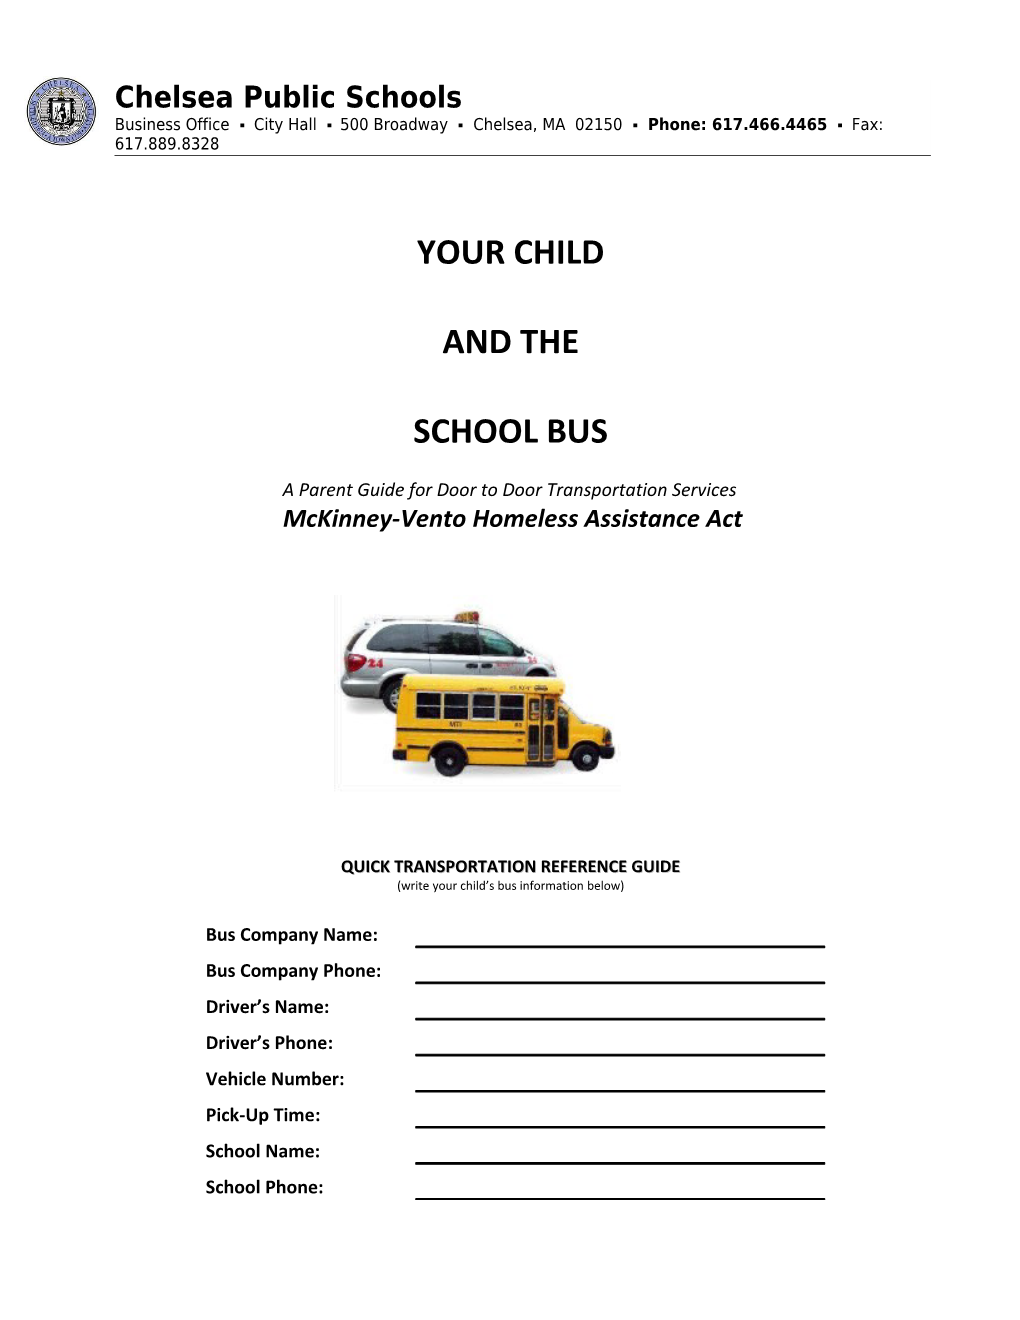 A Parent Guide for Door to Door Transportation Services s1